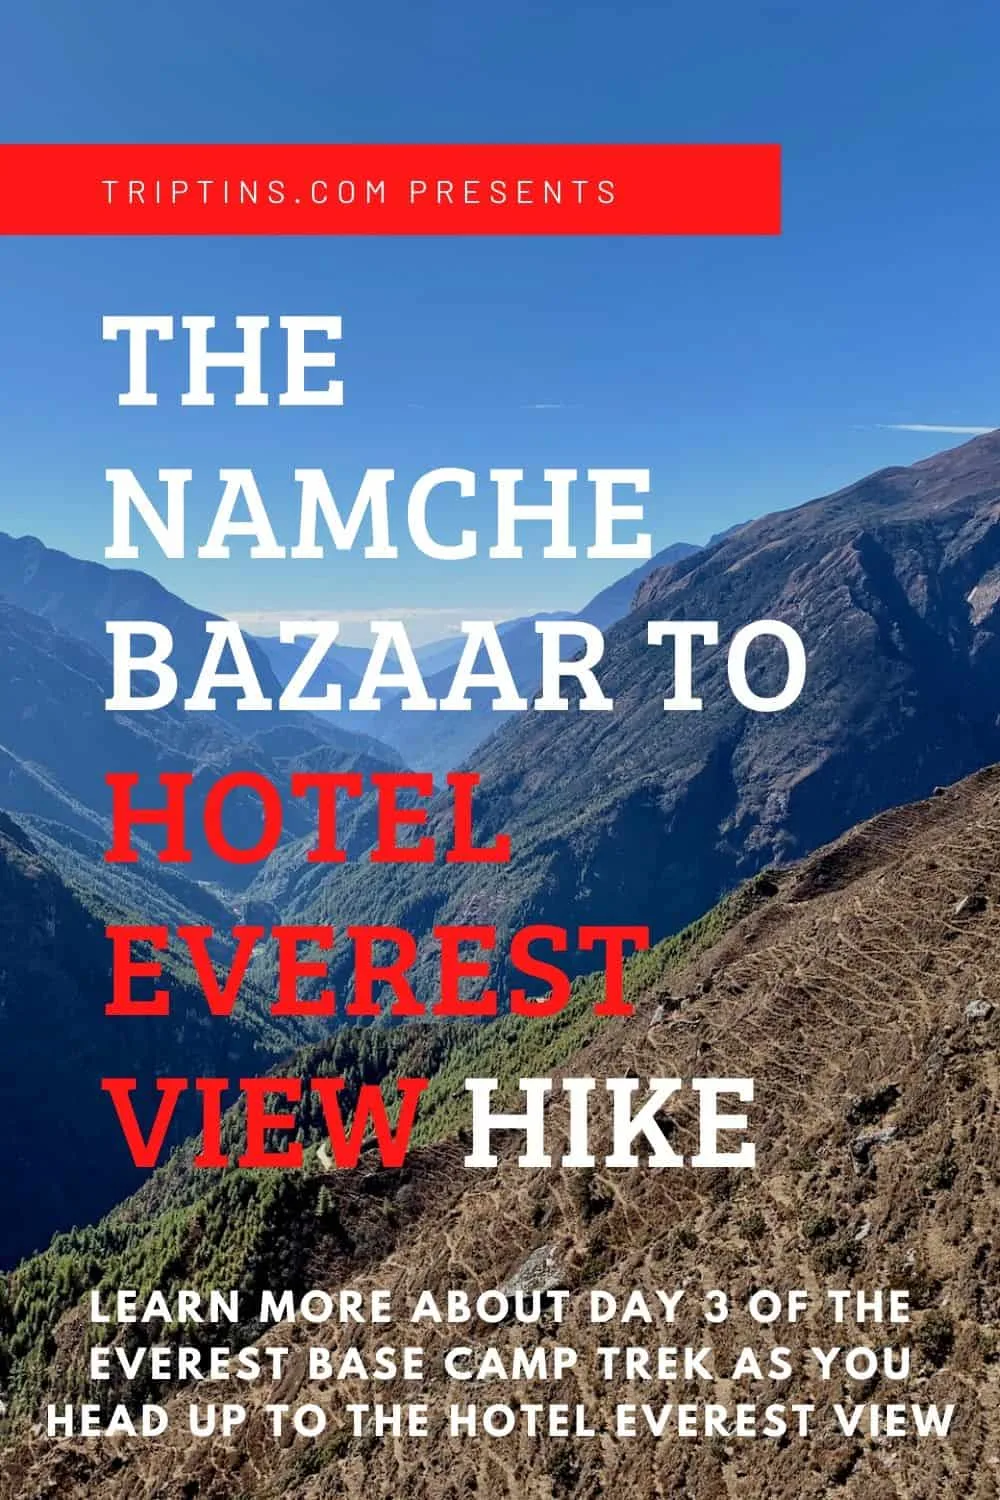 Hotel Everest View Hike